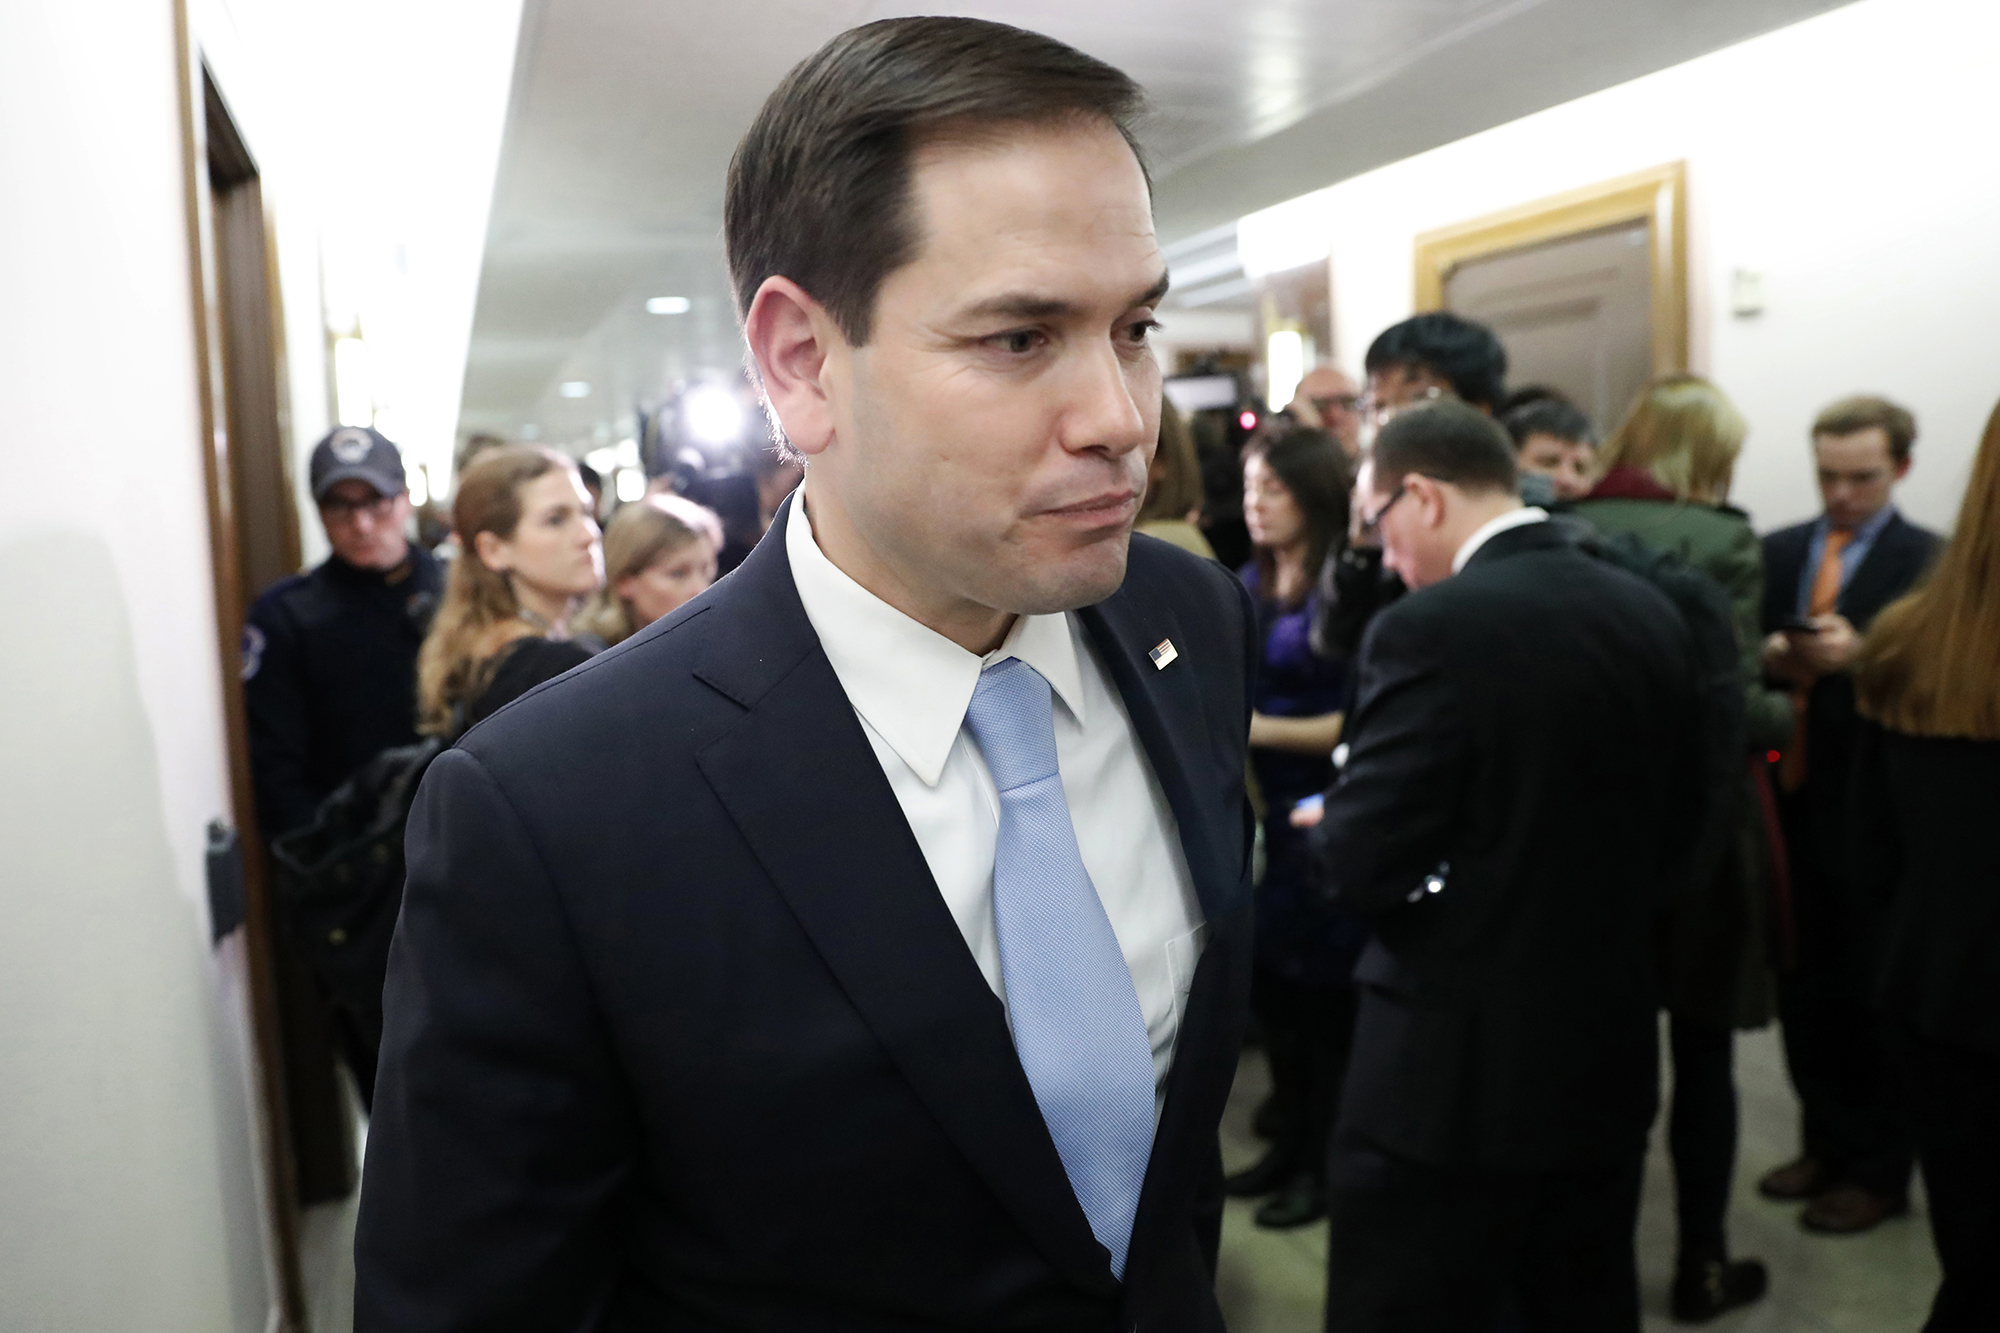 Sen. Marco Rubio departs after speaking with the media after a Senate Foreign Relations committee business meeting on the nomination of Rex Tillerson to be Secretary of State, on Jan. 23, 2017 in Washington, D.C.